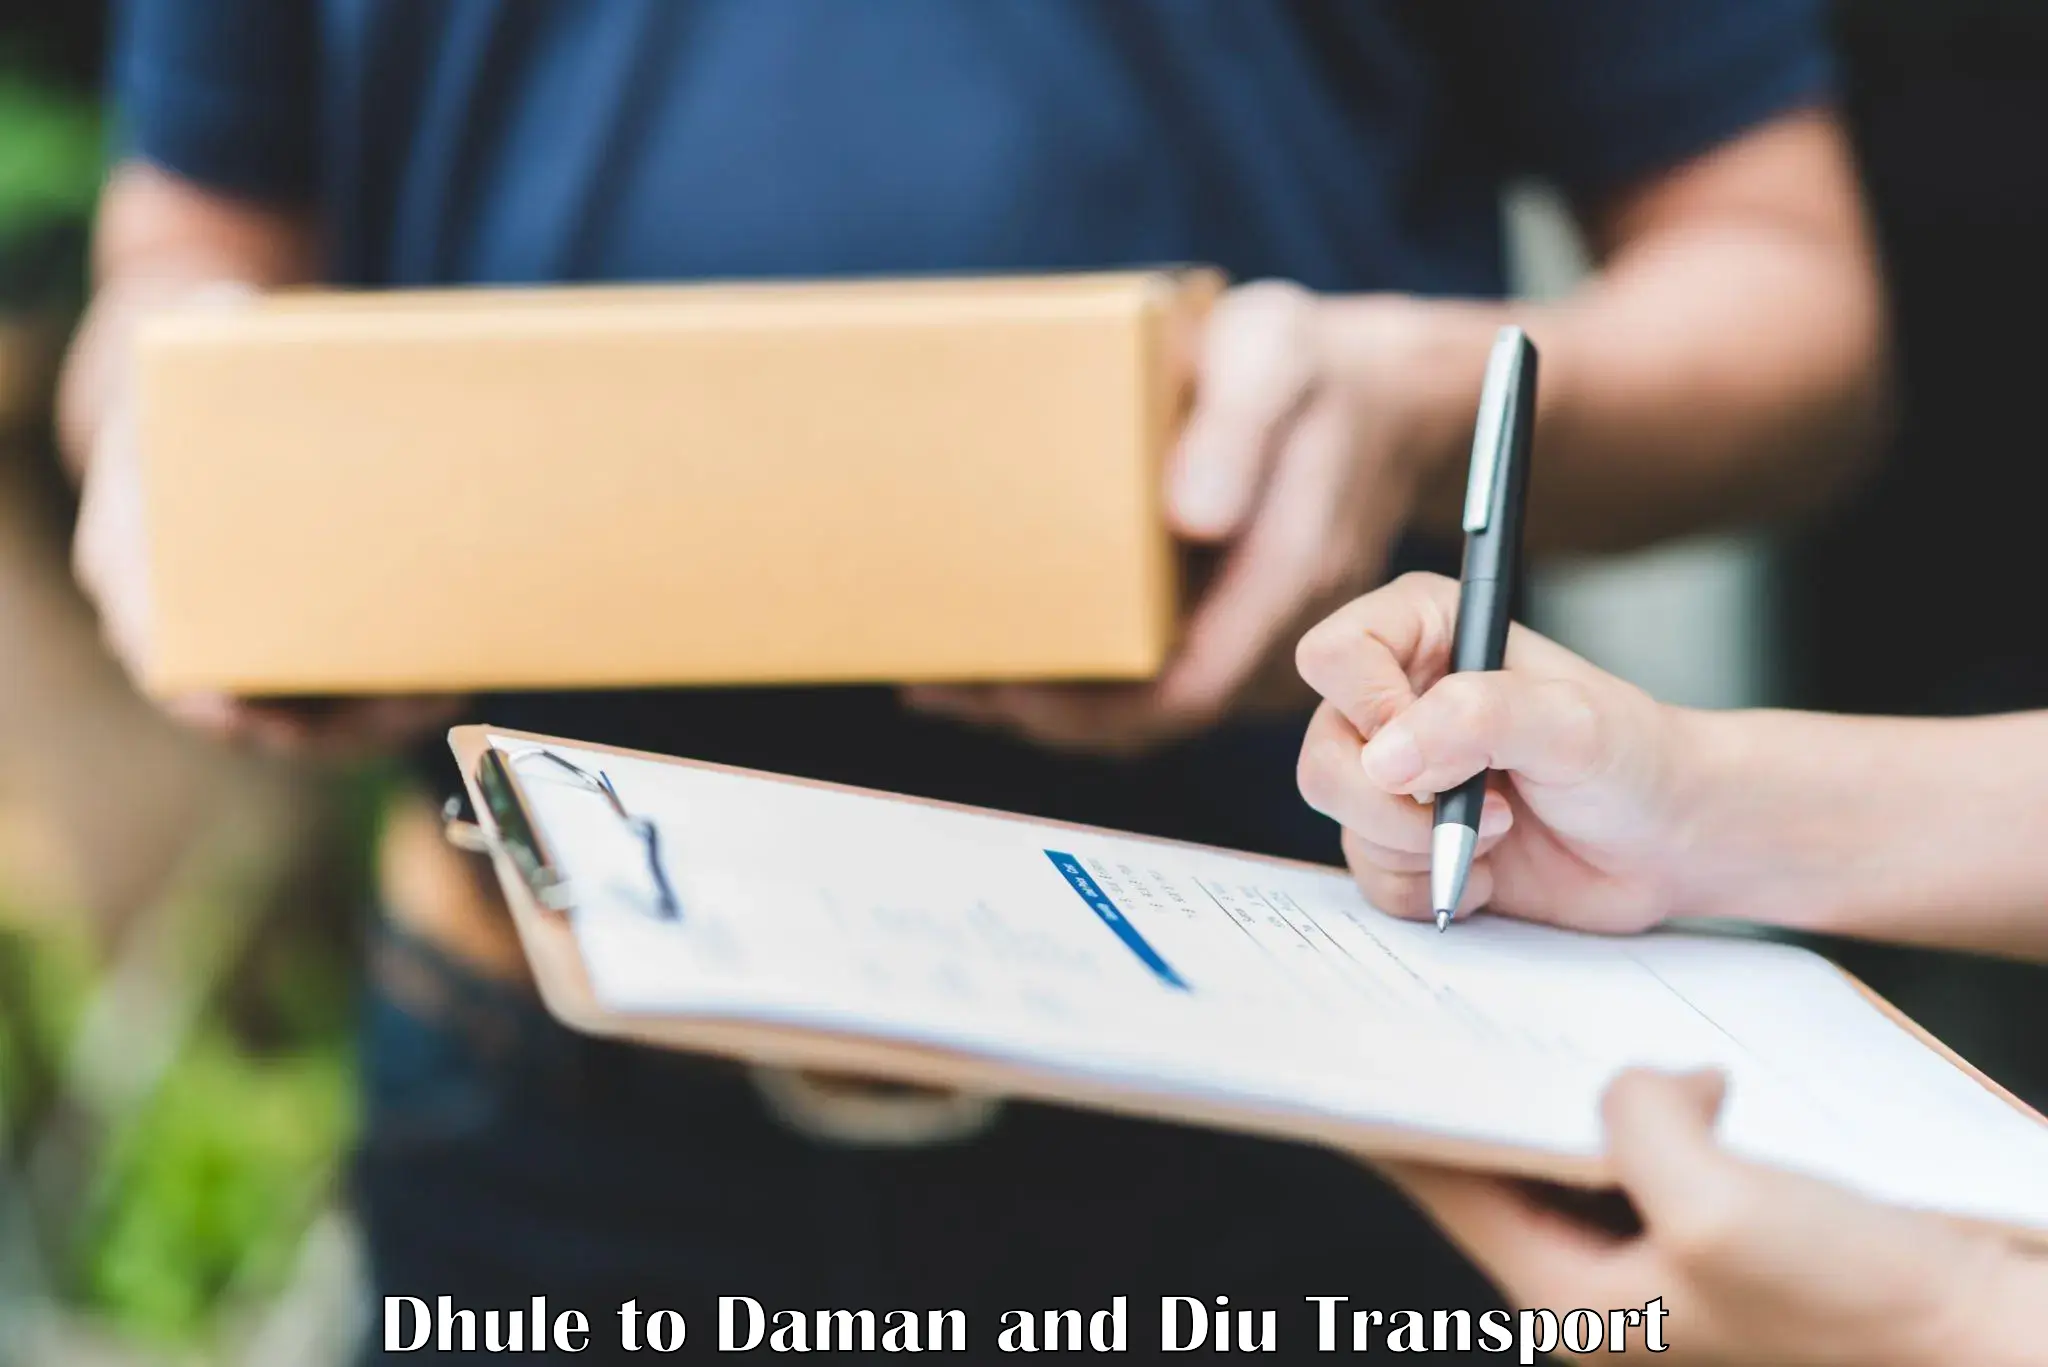 Furniture transport service in Dhule to Daman and Diu